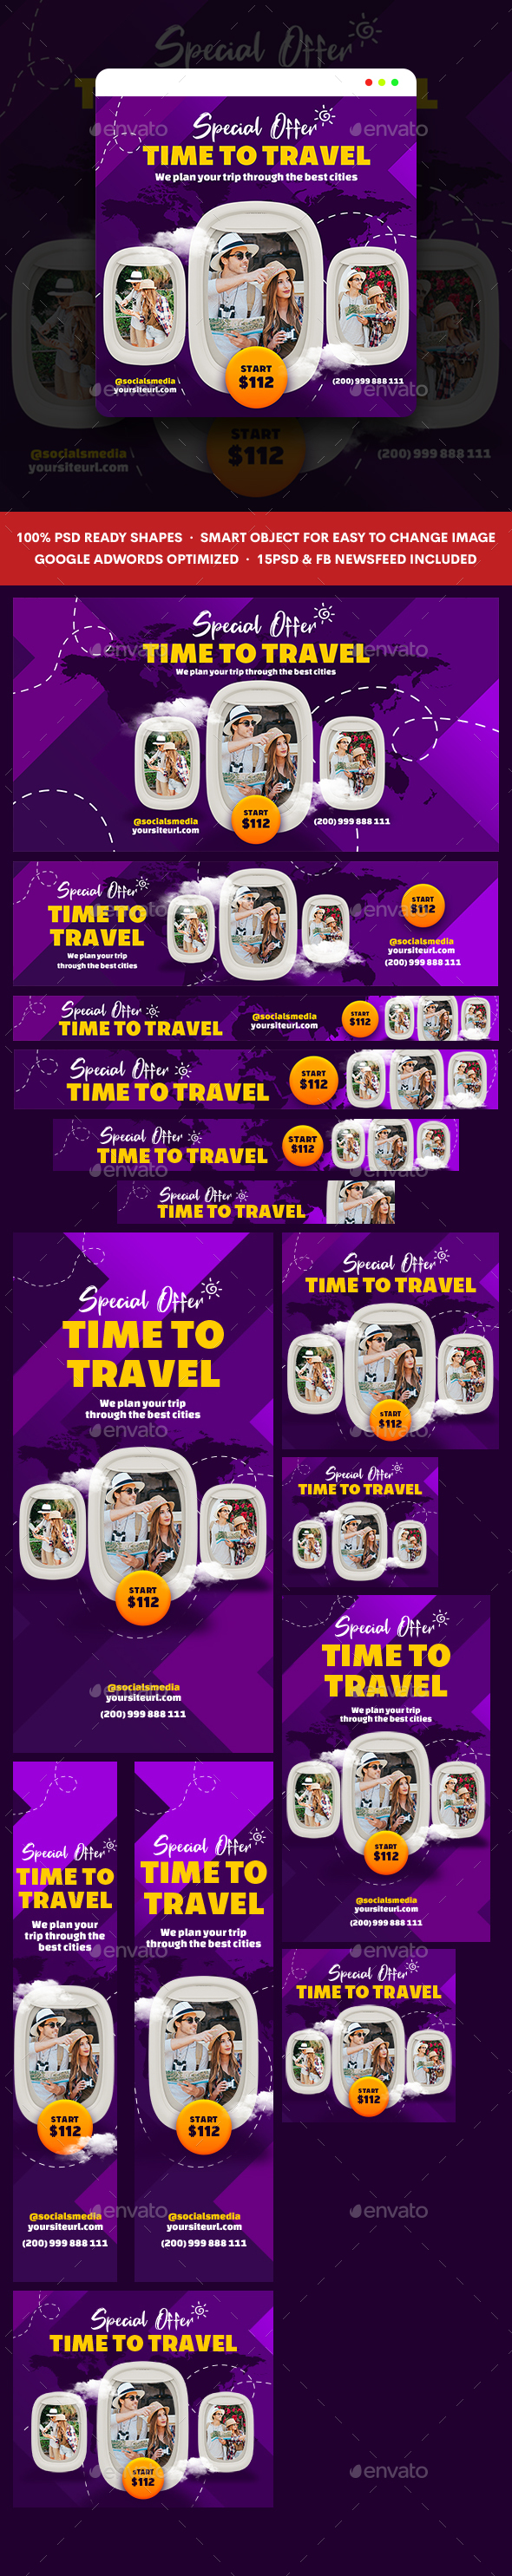 [DOWNLOAD]Travel Agency Banners Ad